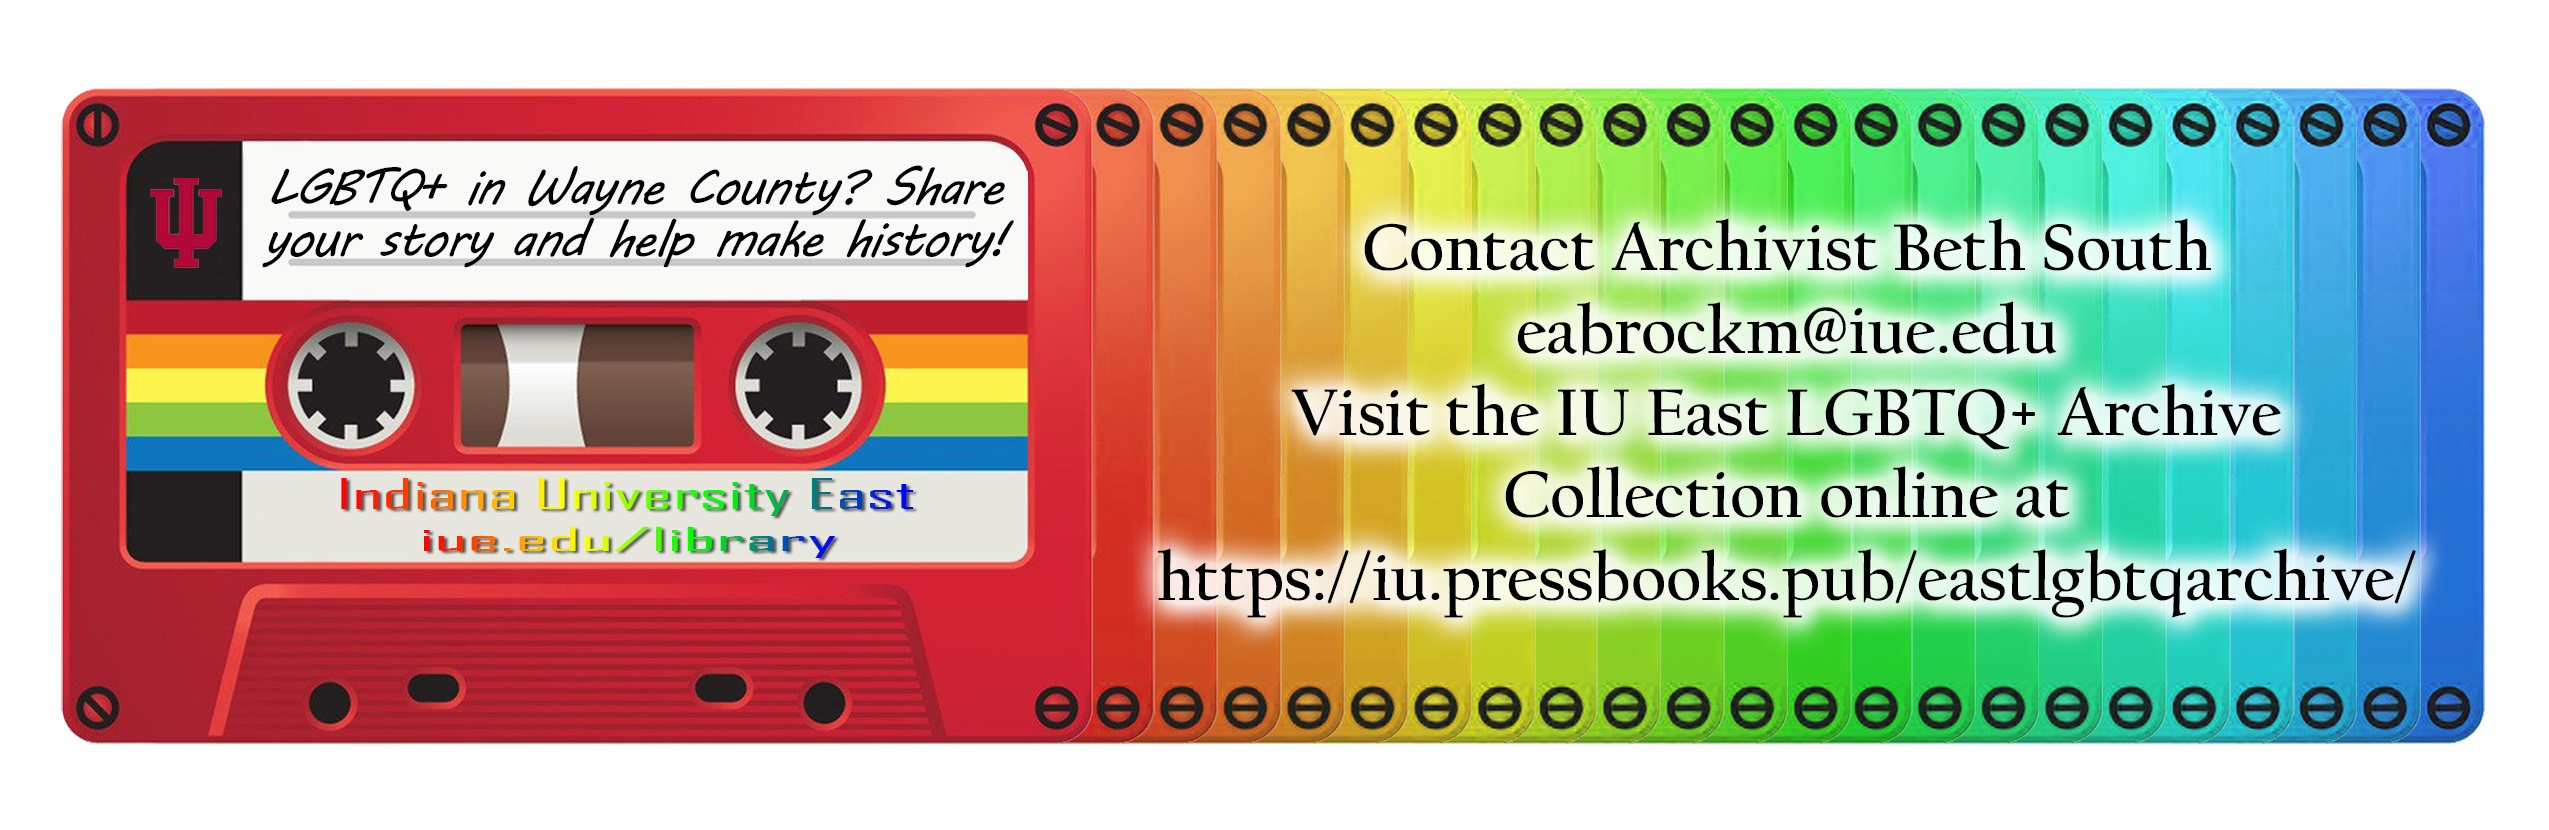 Image of promotional bookmark promoting the archives collection. Text states: LGBTQ+ in Wayne County? Share your story and help make history! Contact Archivist Beth South at eabrockm@iue.edu. Visit the IU East LGBTQ+ Archive Collection online at https://iu.pressbooks.pub/eastlgbtqarchive/